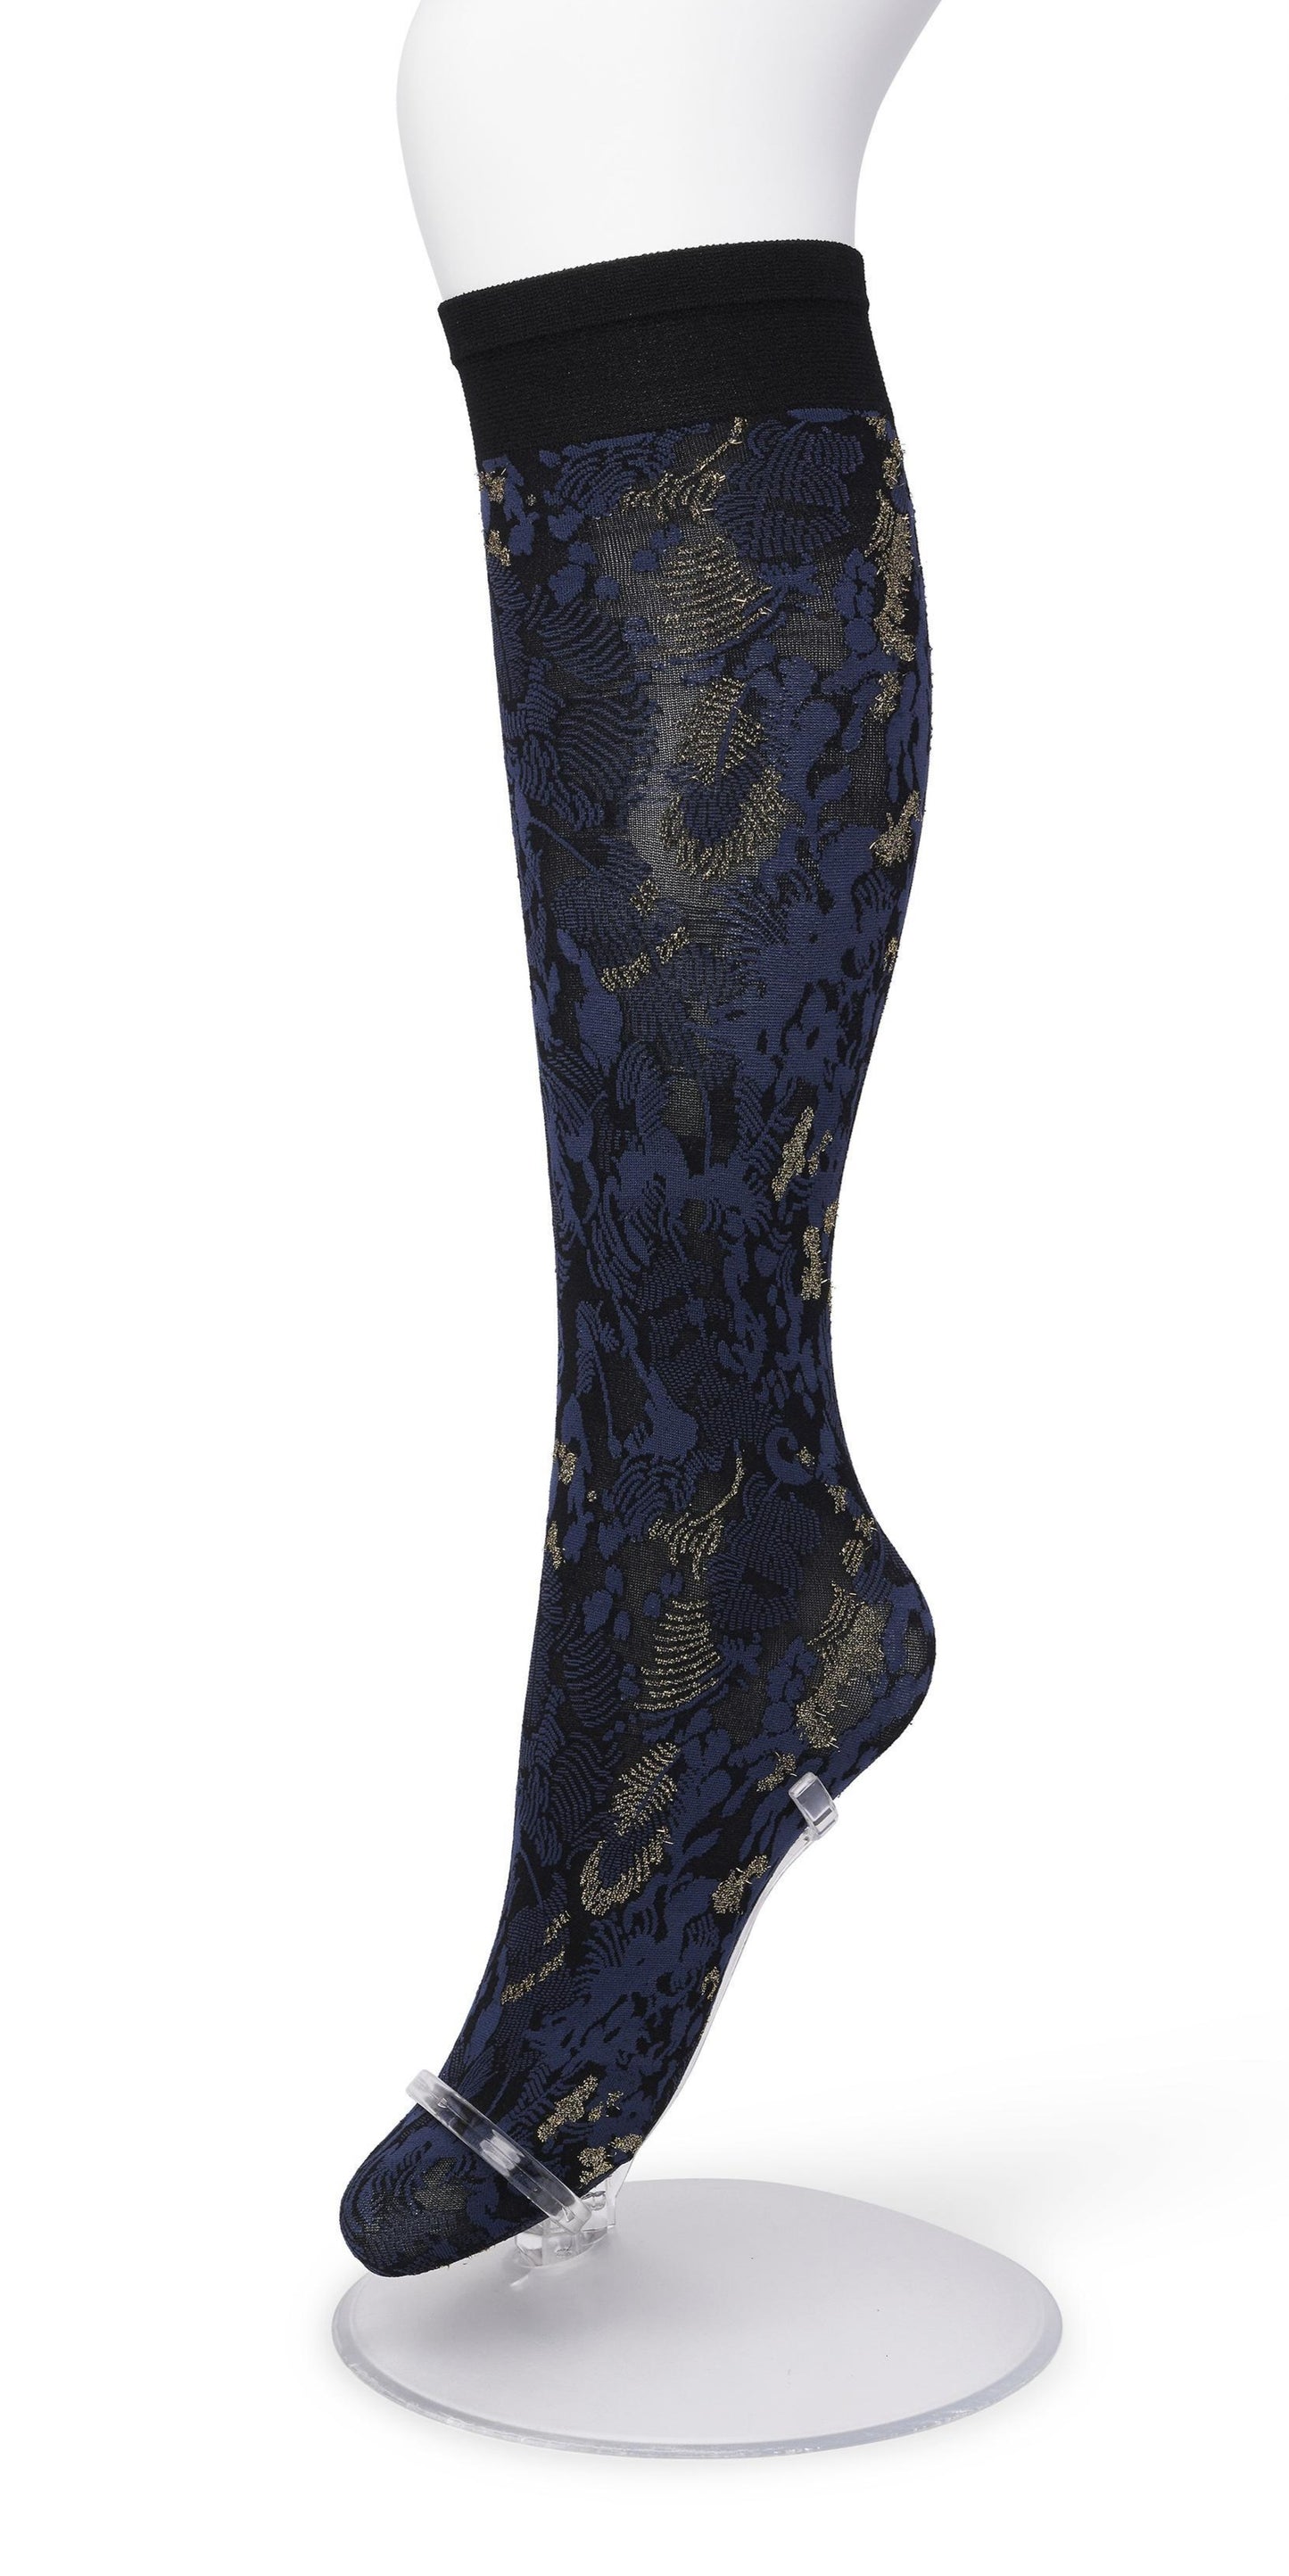 Bonnie Doon Botanical Lurex Knee-highs - Navy blue soft matte opaque fashion knee-high socks with a woven leaf style pattern in black and sparkly metallic gold and deep black comfort cuff.